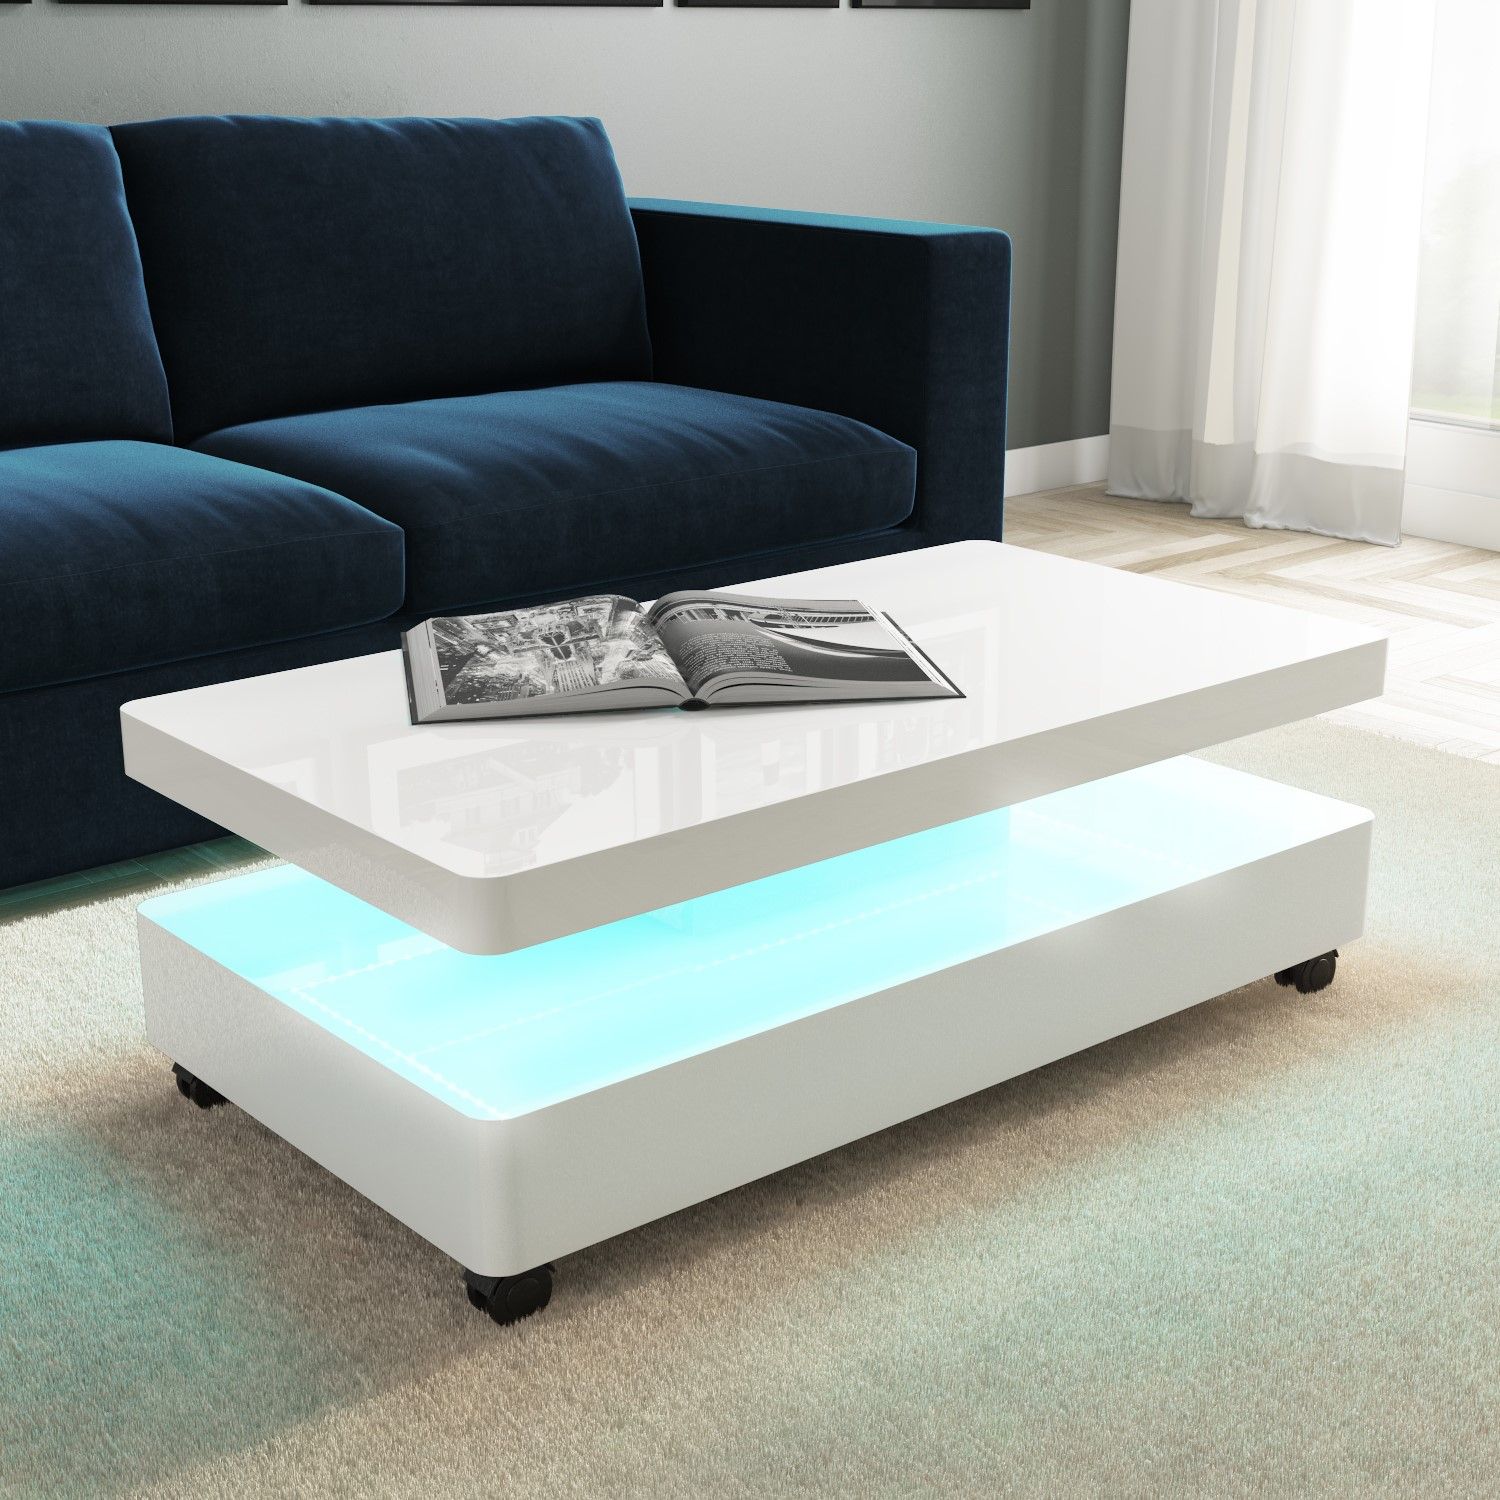 High Gloss White Coffee Table With Led Lighting 5060388562168 | Ebay In Led Coffee Tables With 4 Drawers (Gallery 11 of 20)